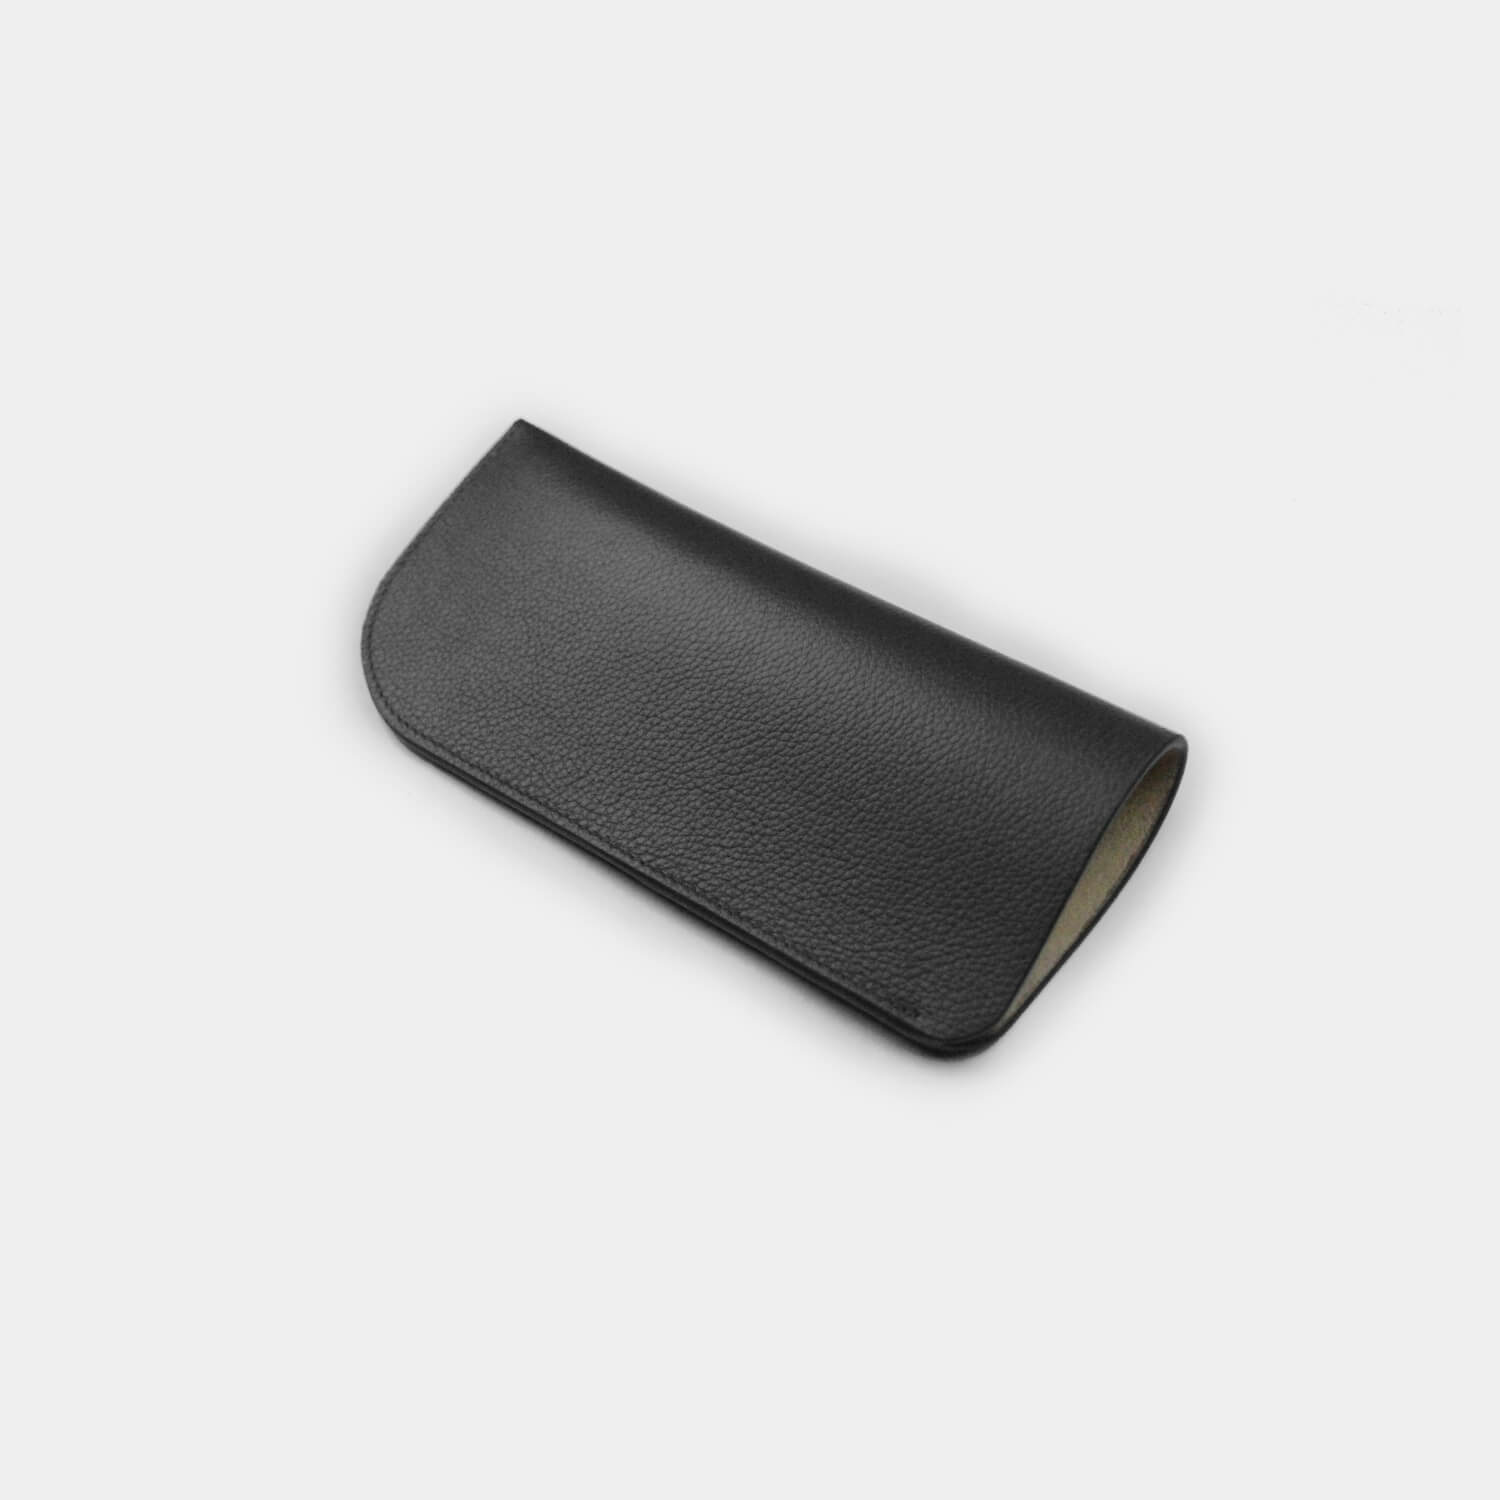 Fine grain leather slip glasses case to protect and store glasses and sunglasses, branded with your company logo